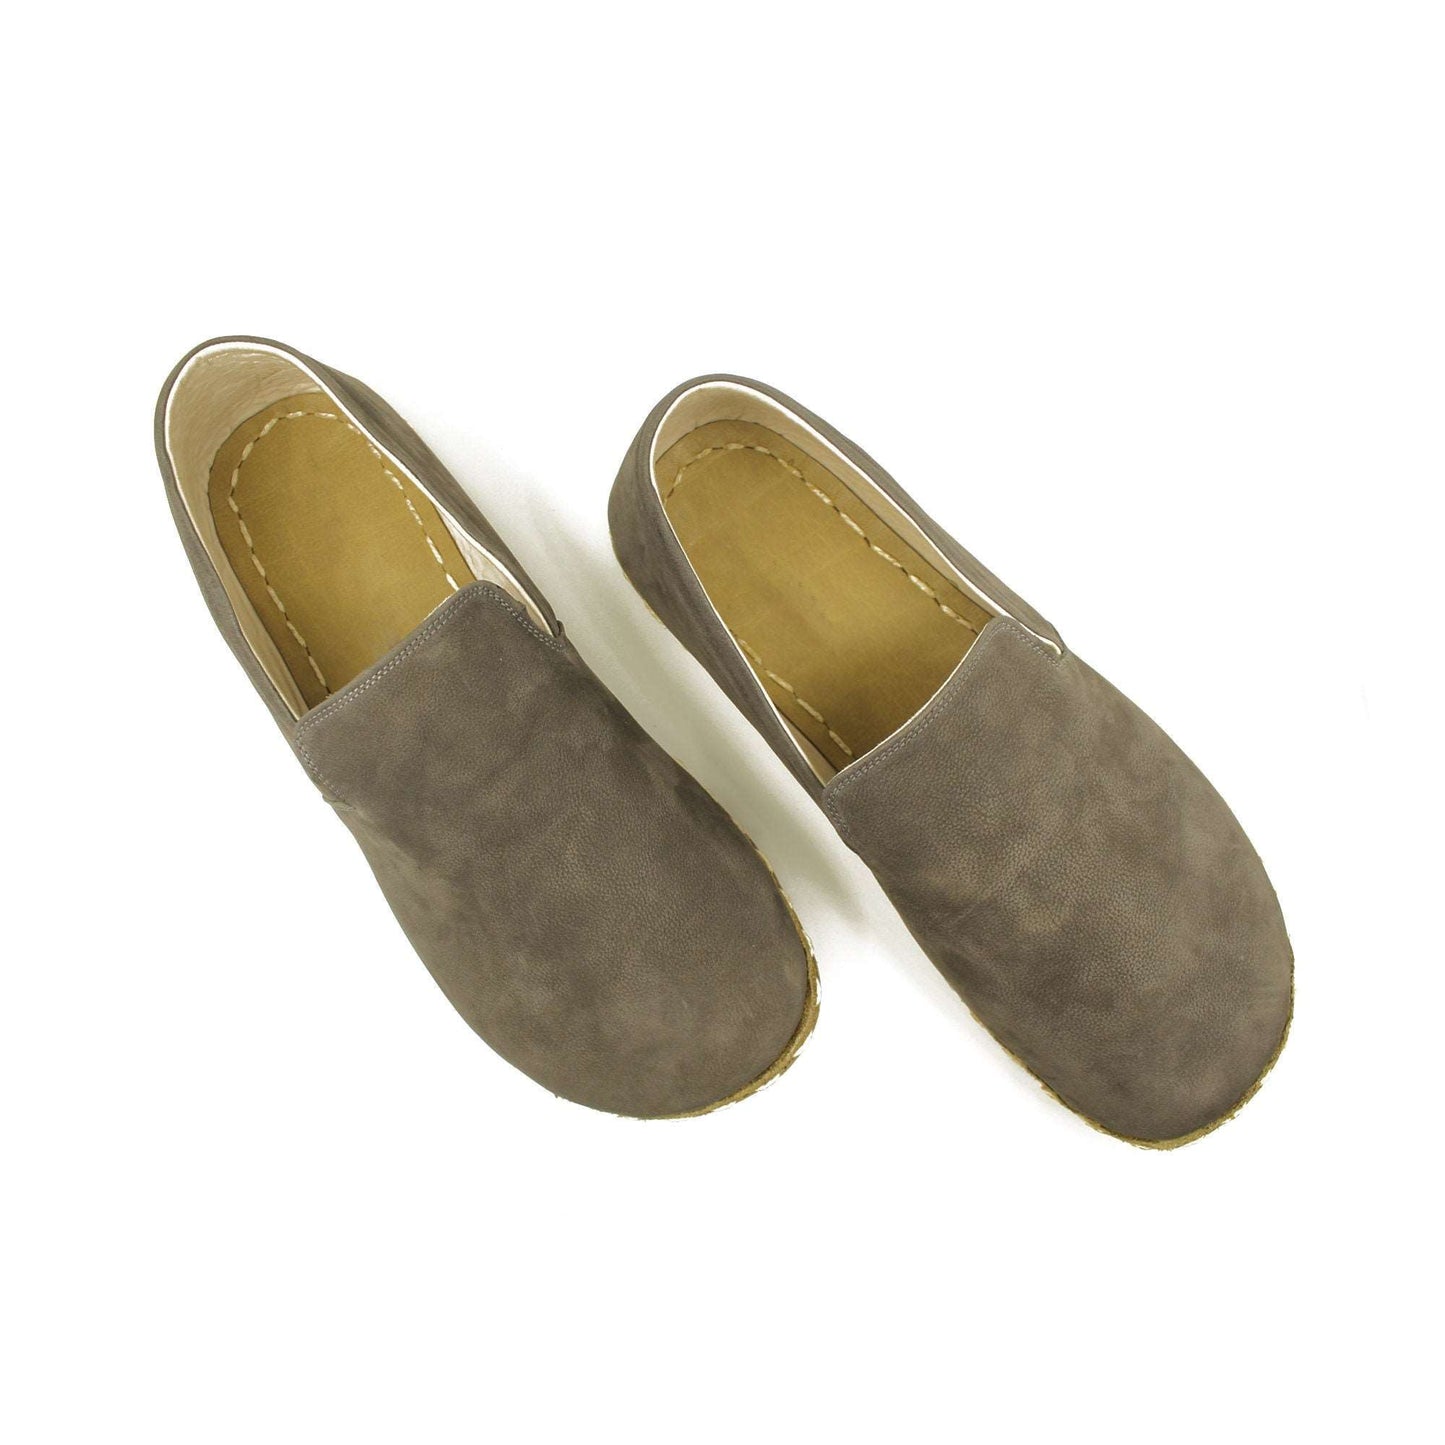 wide toe handmade shoes gray nubuck leather all over zero drop for men - nefes shoes